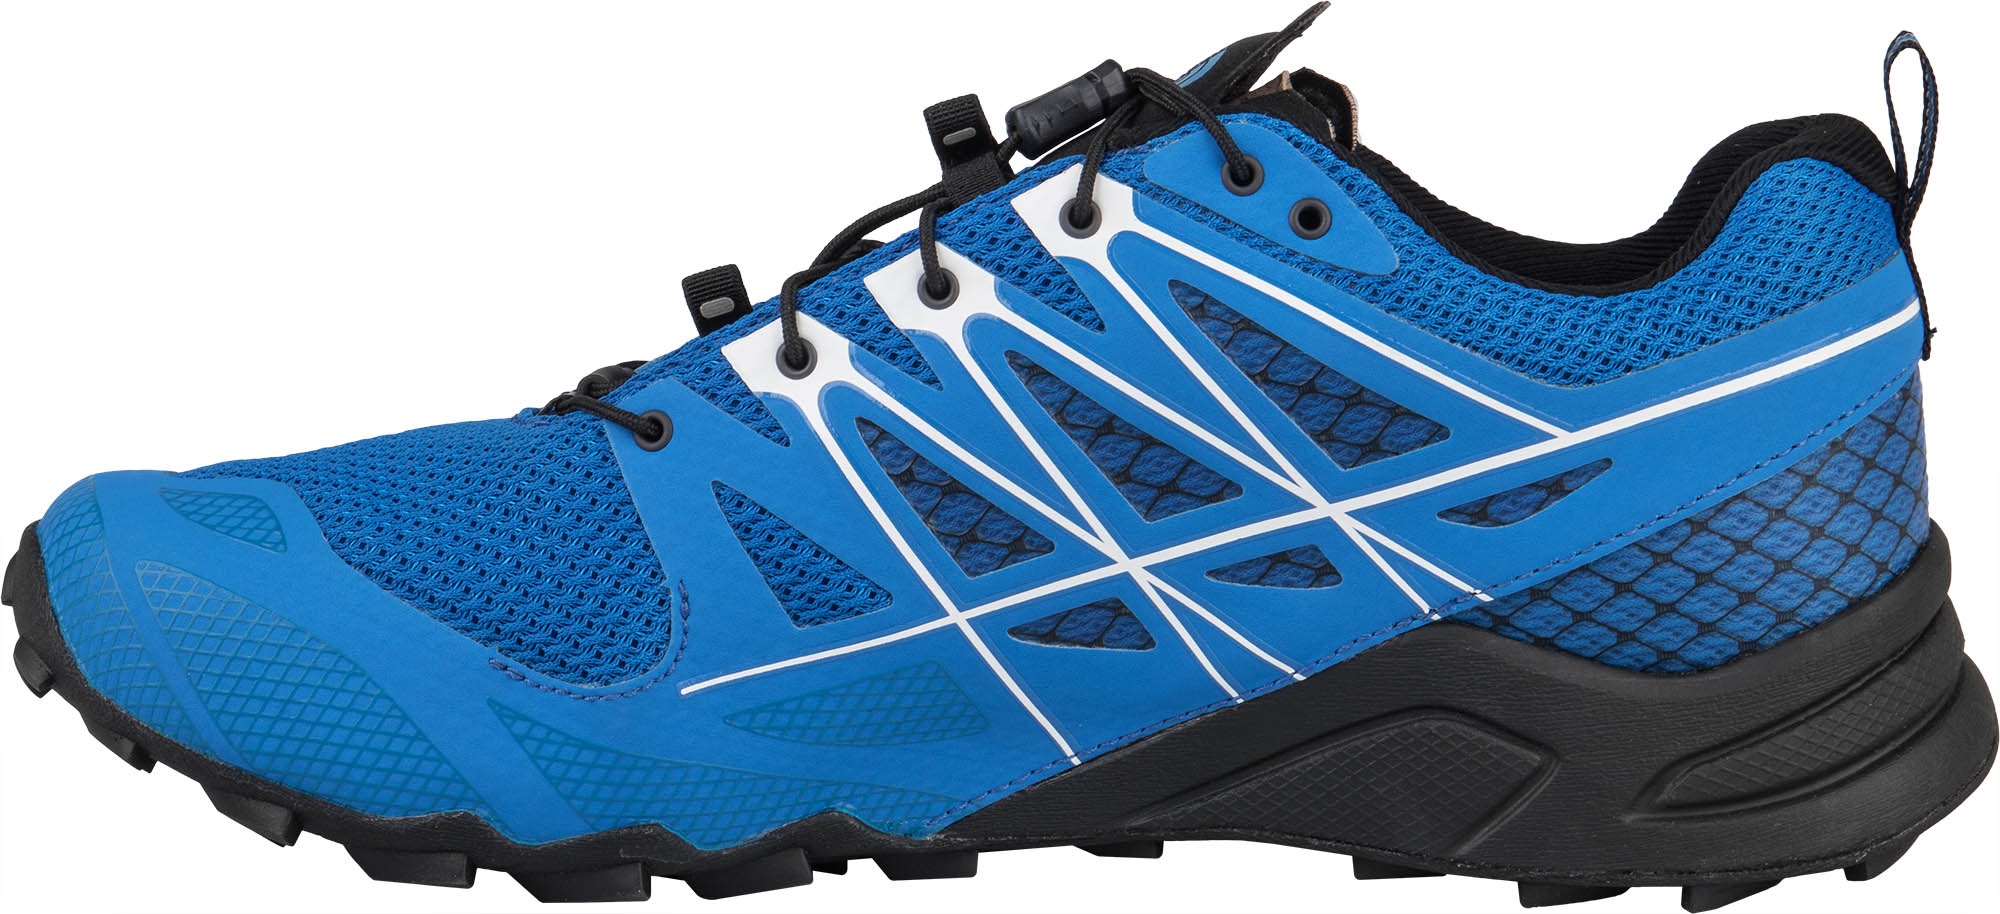 Surgery Fitness As fast as a flash The North Face ULTRA MT II GTX M | sportisimo.com